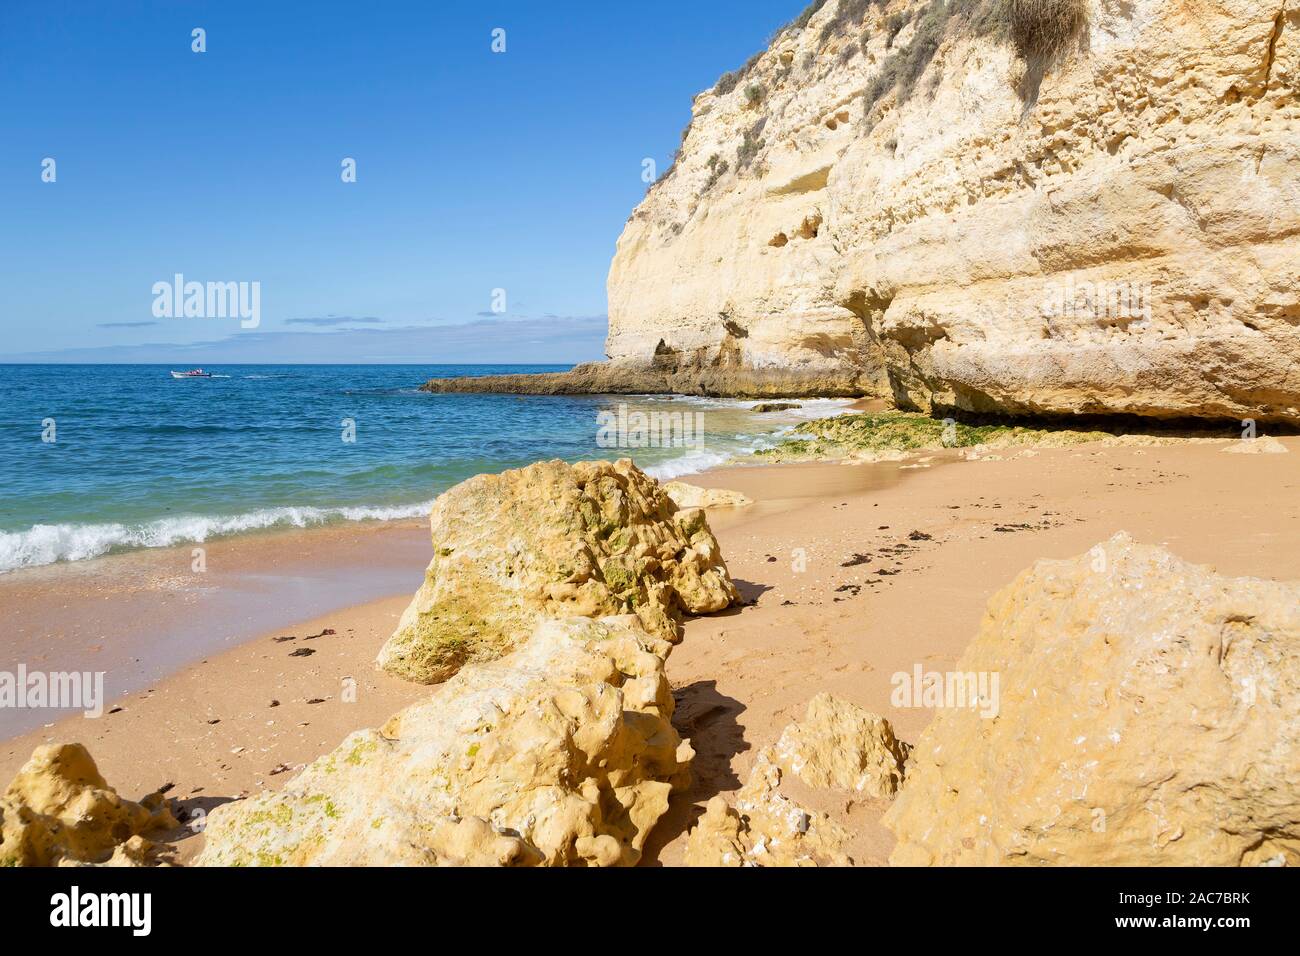 Rocks and cliff at Carvoeiro beach in Portugal Stock Photo